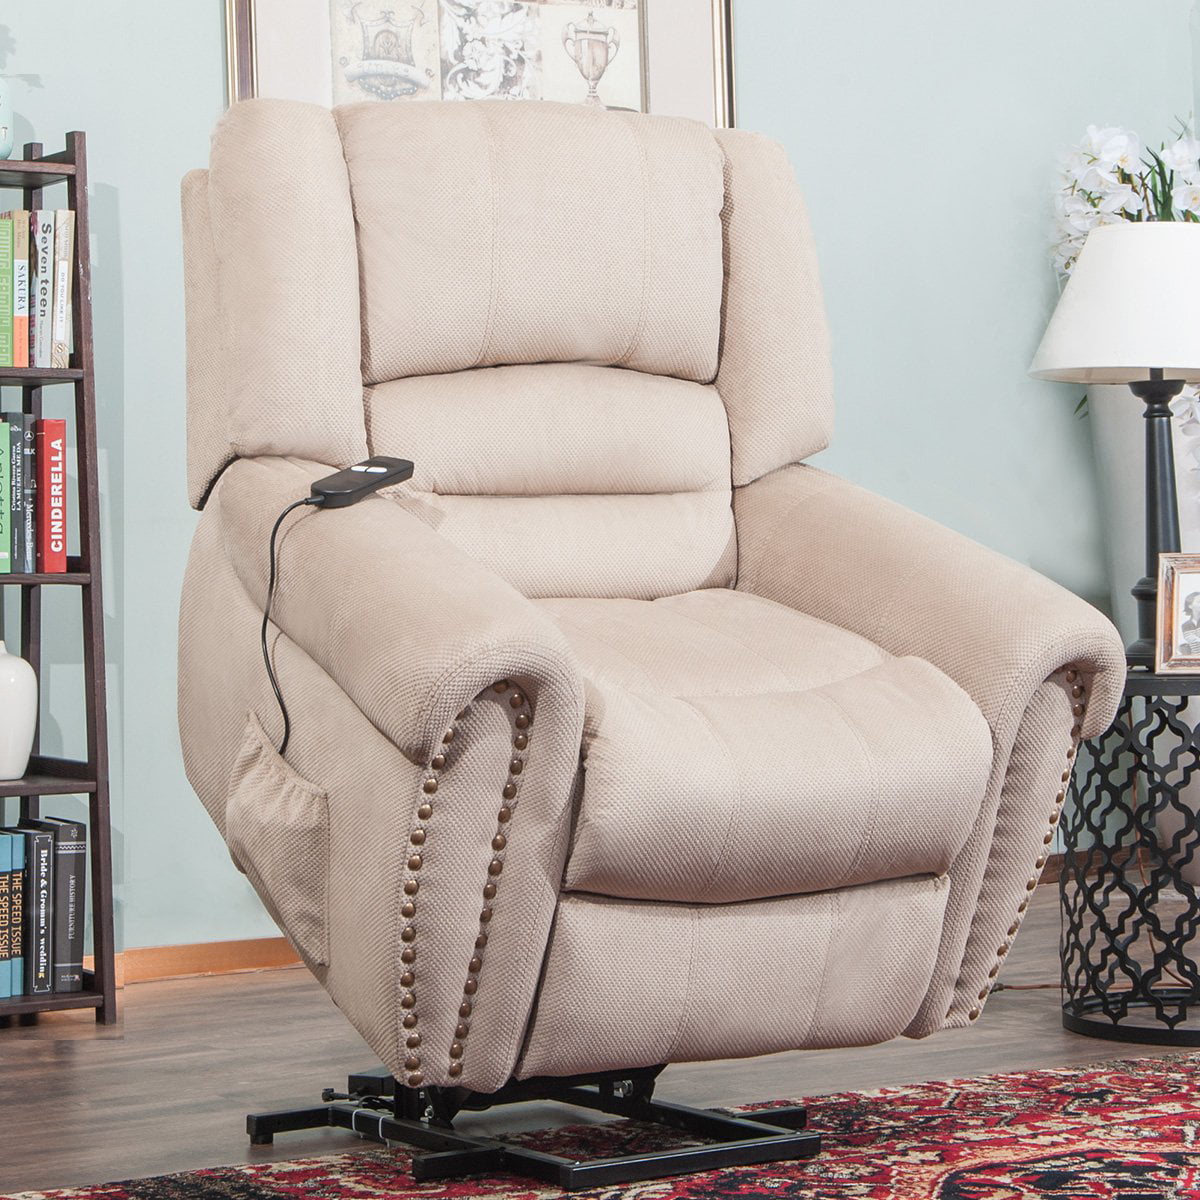 Wilshire Series HeavyDuty Power Lift Recliner Chair with